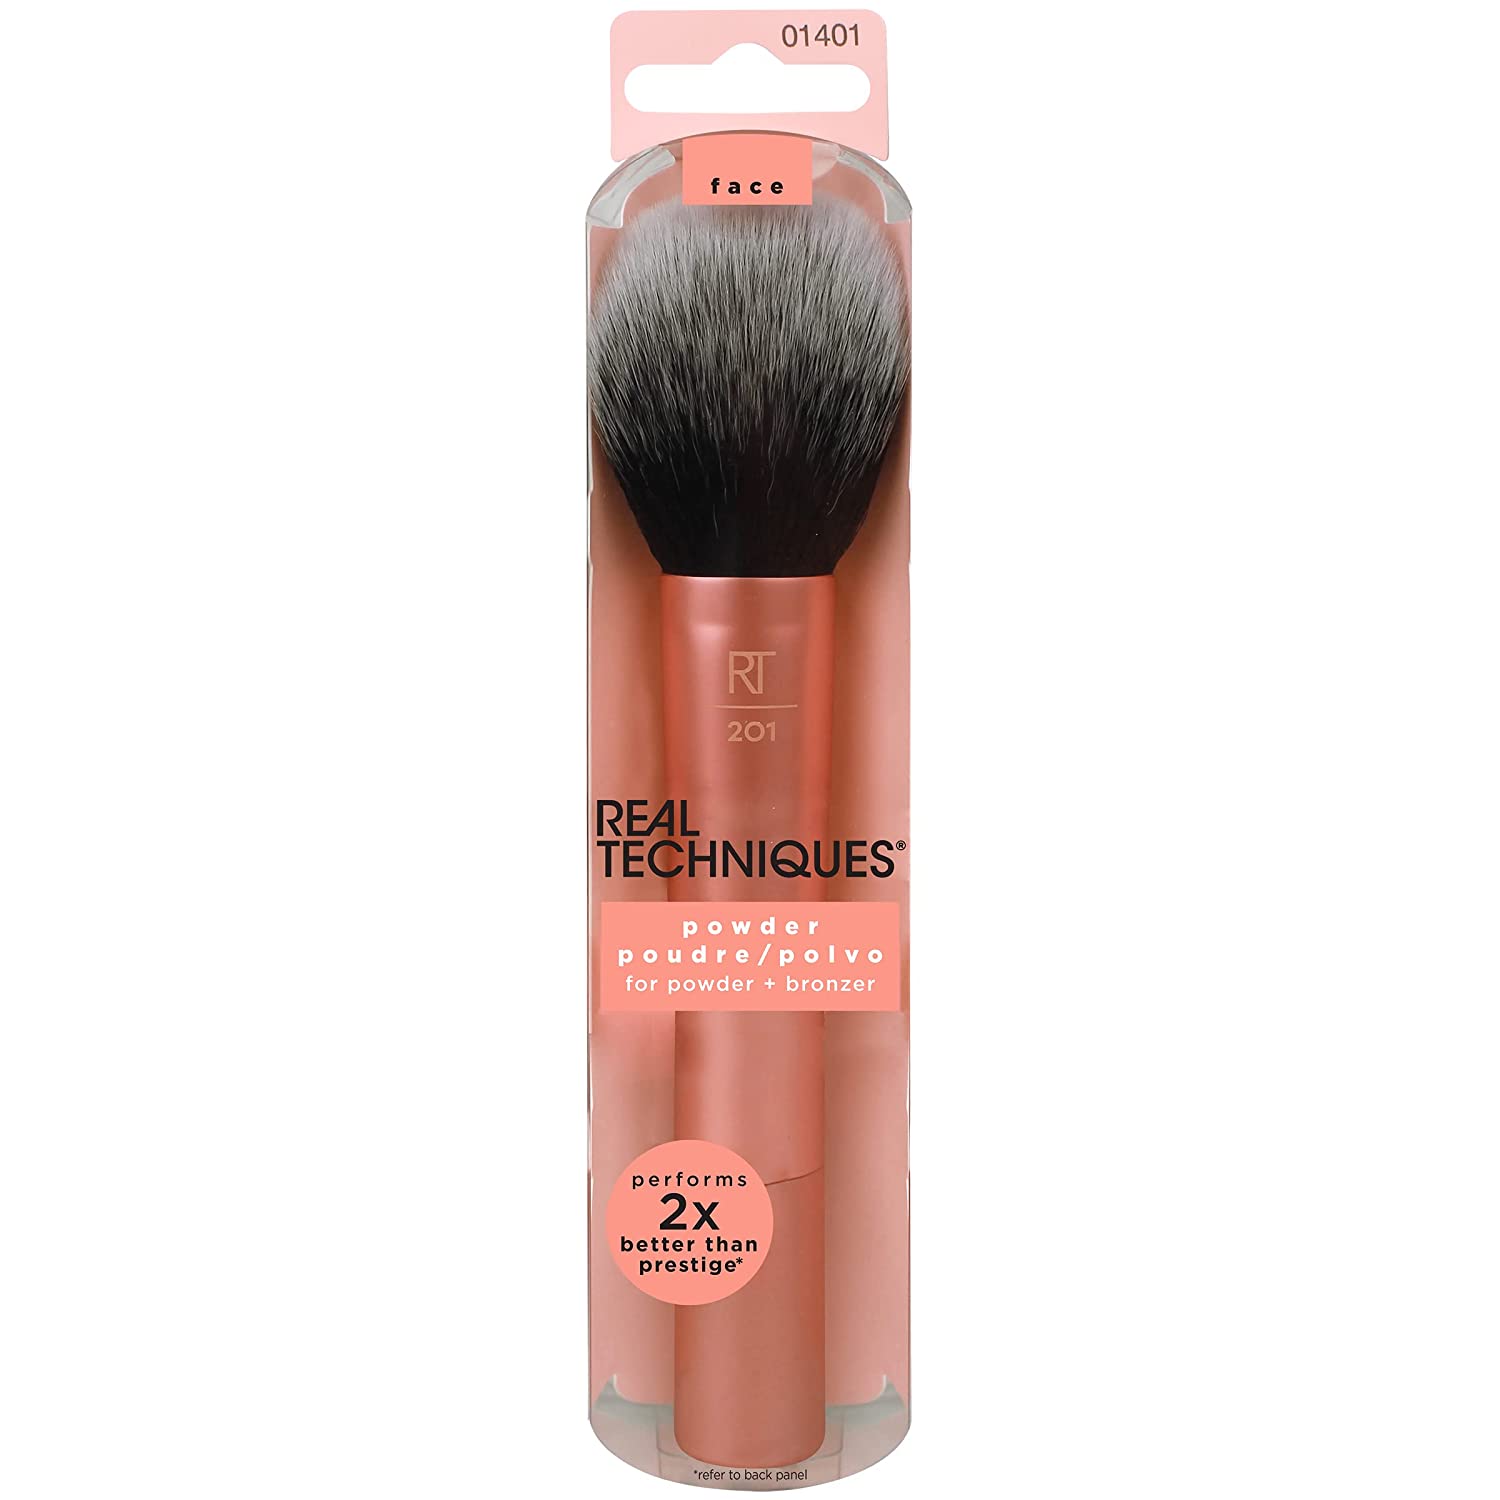 Real Techniques Powder & Bronzer Brush Helps Build Smooth Even Coverage :  Amazon.in: Beauty